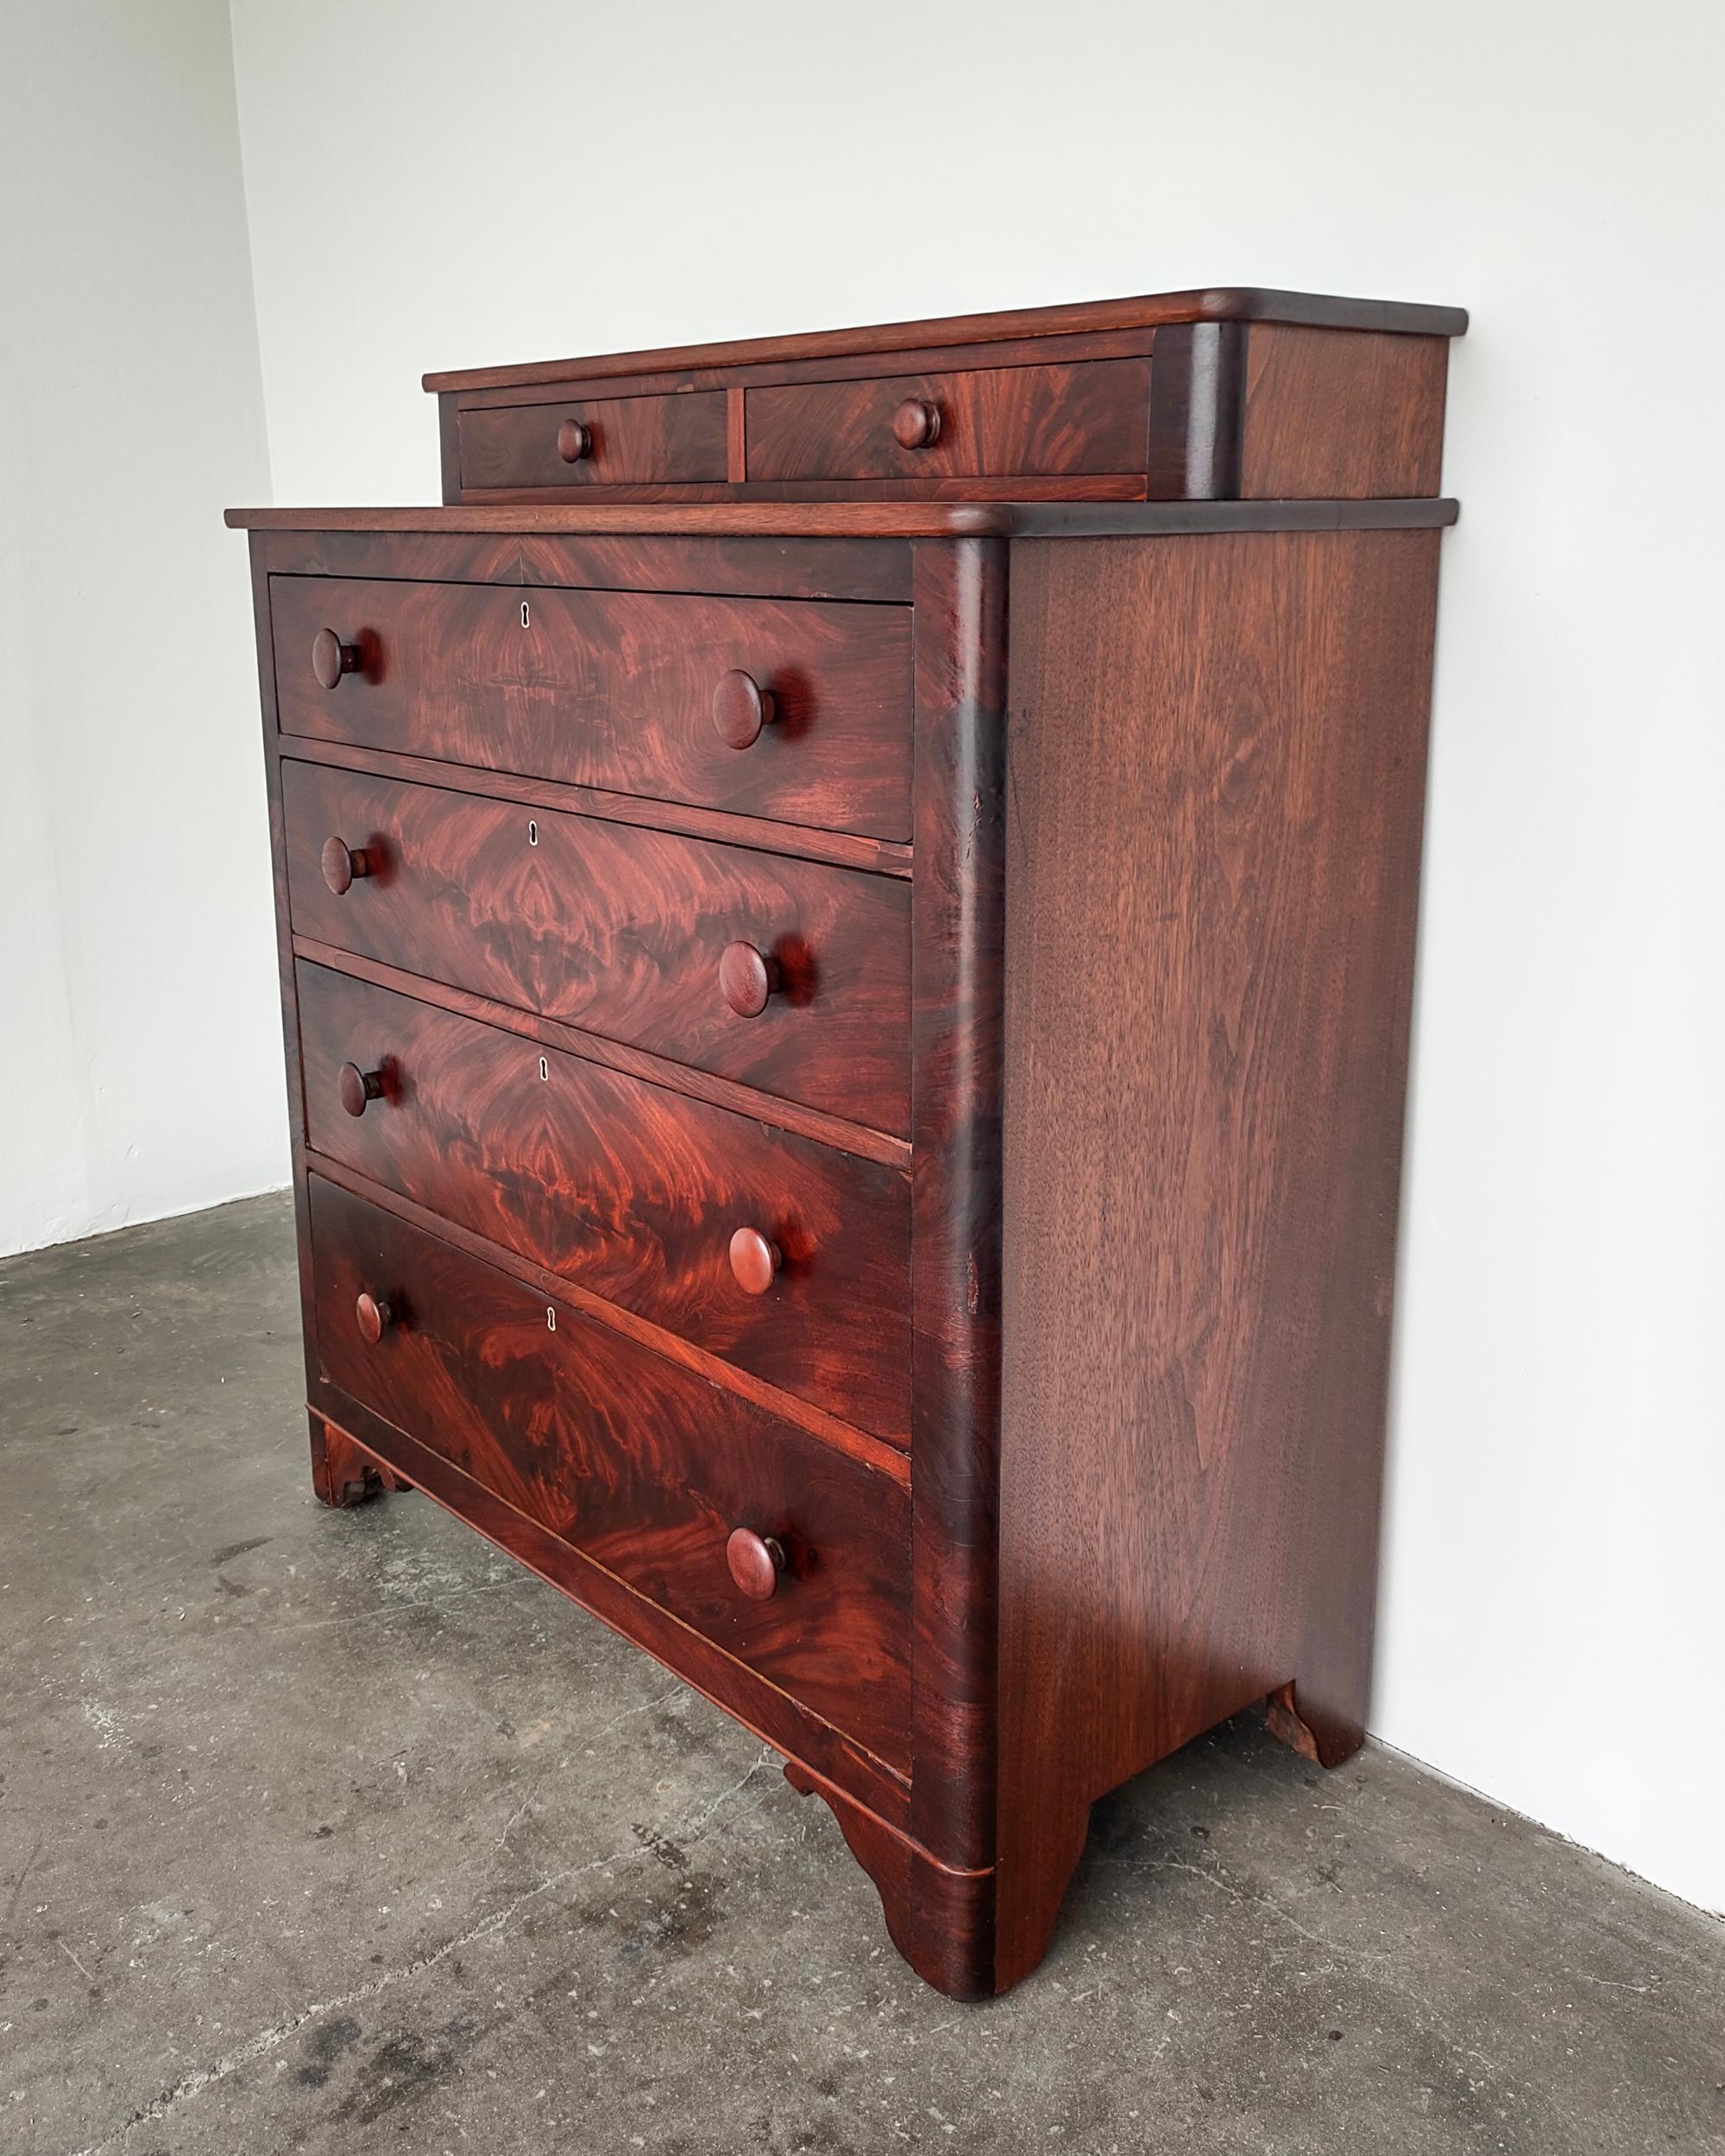 Rare book-matched black walnut highboy dresser circa 1890s. Professionally refinished with 100% natural non-toxic matte/satin oil finish. Four large drawers with an additional two small on top. Solid wood construction with gorgeous deep walnut wood